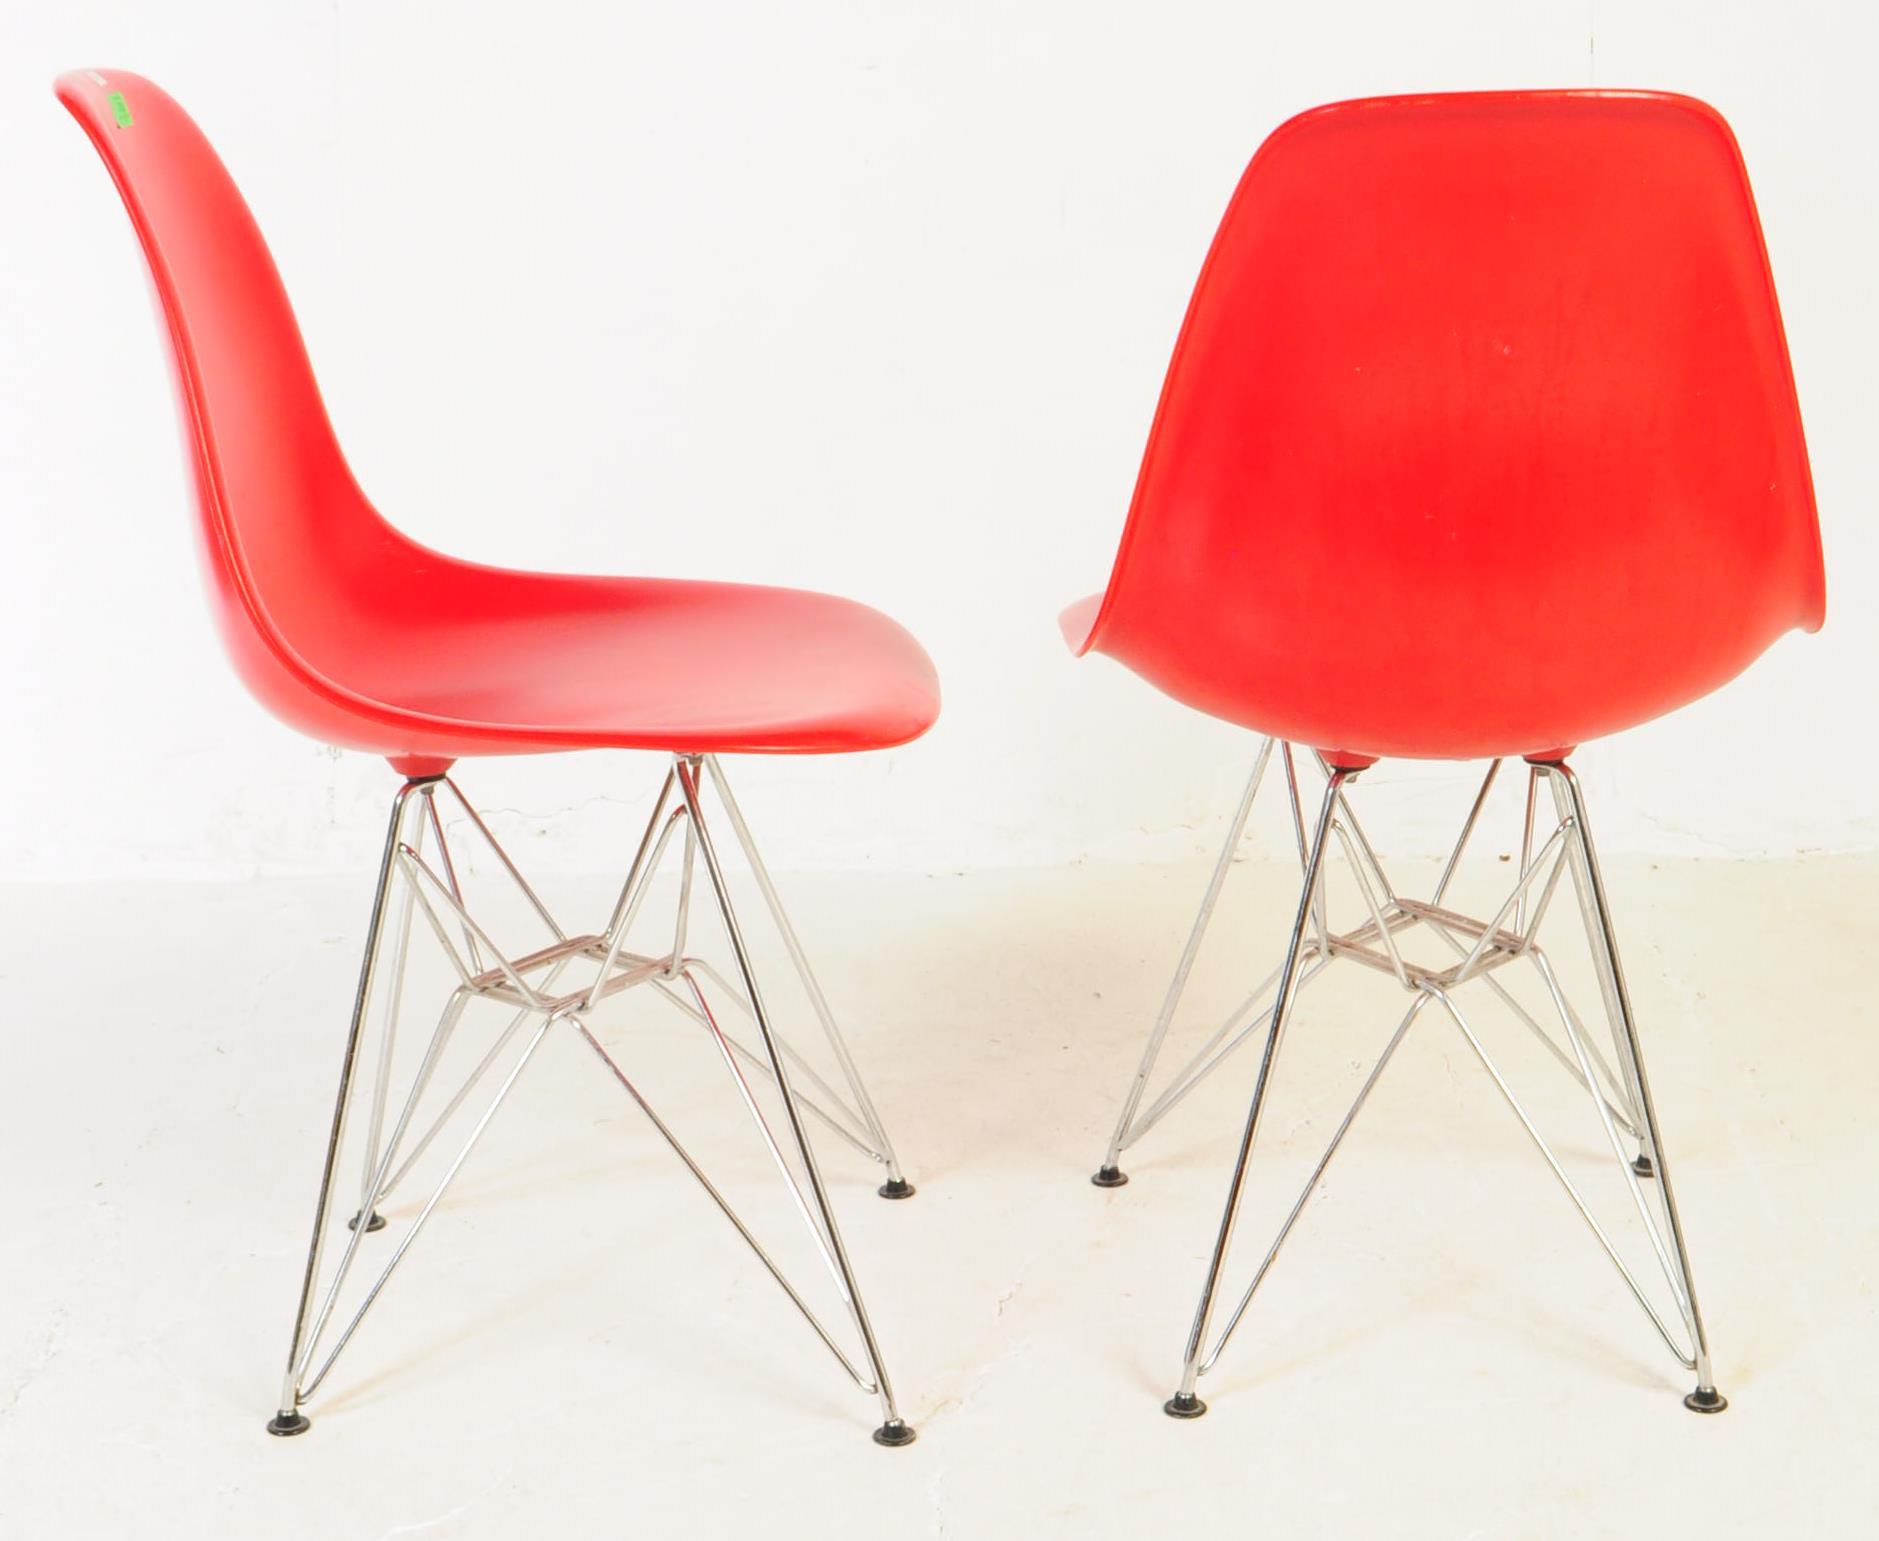 MATCHING PAIR OF CONTEMPORARY DSW STYLE CHAIRS - Image 4 of 5